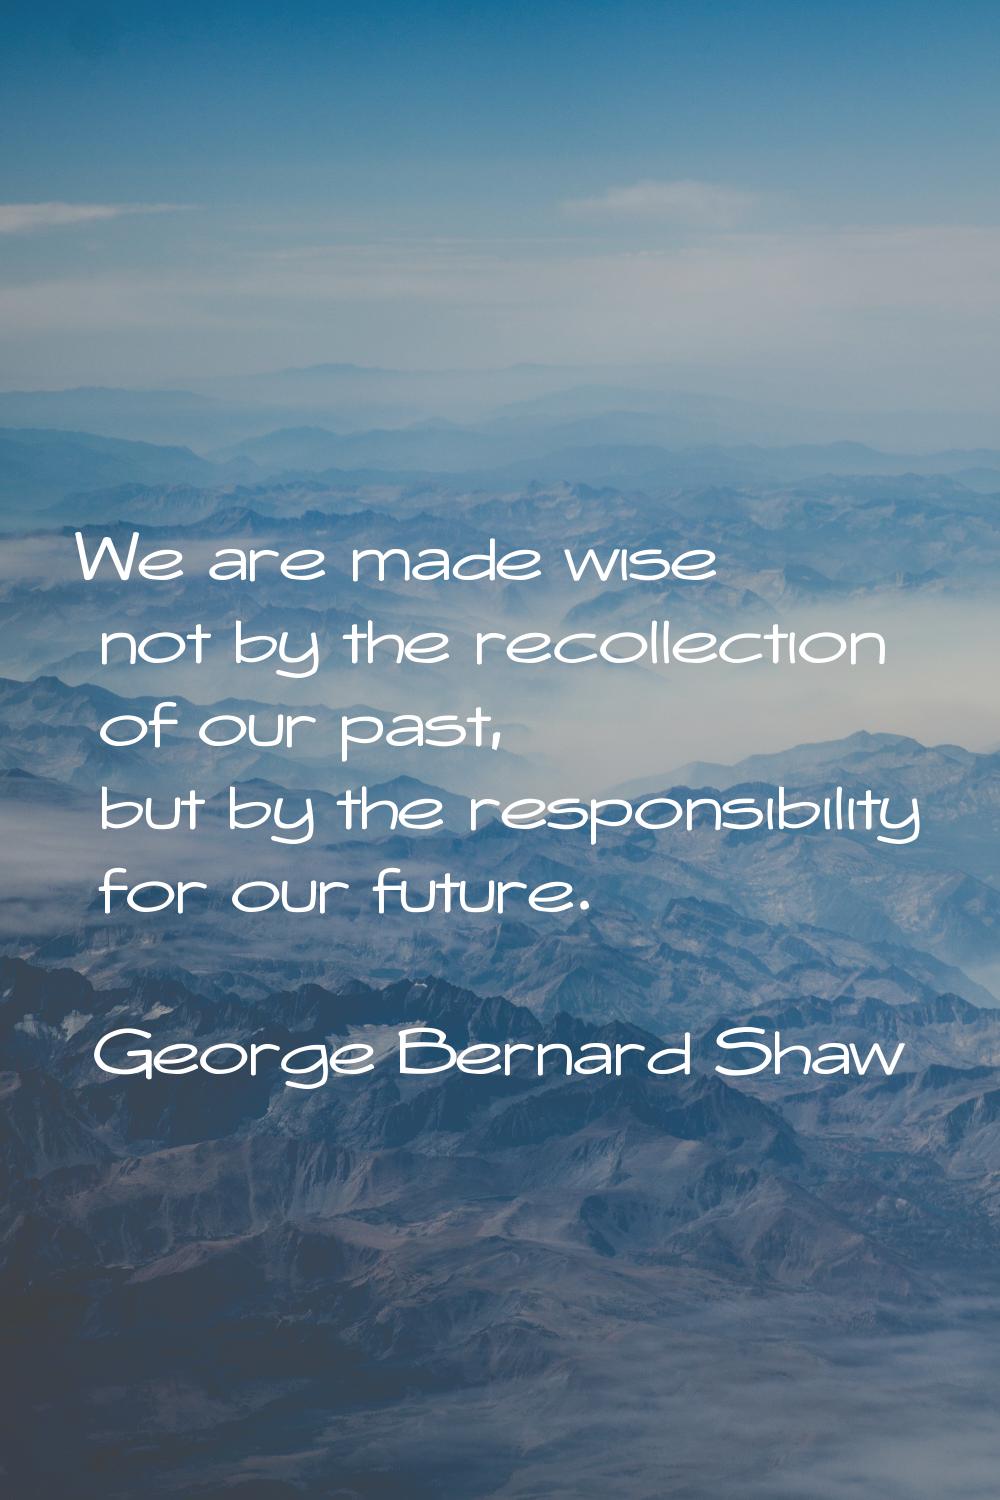 We are made wise not by the recollection of our past, but by the responsibility for our future.